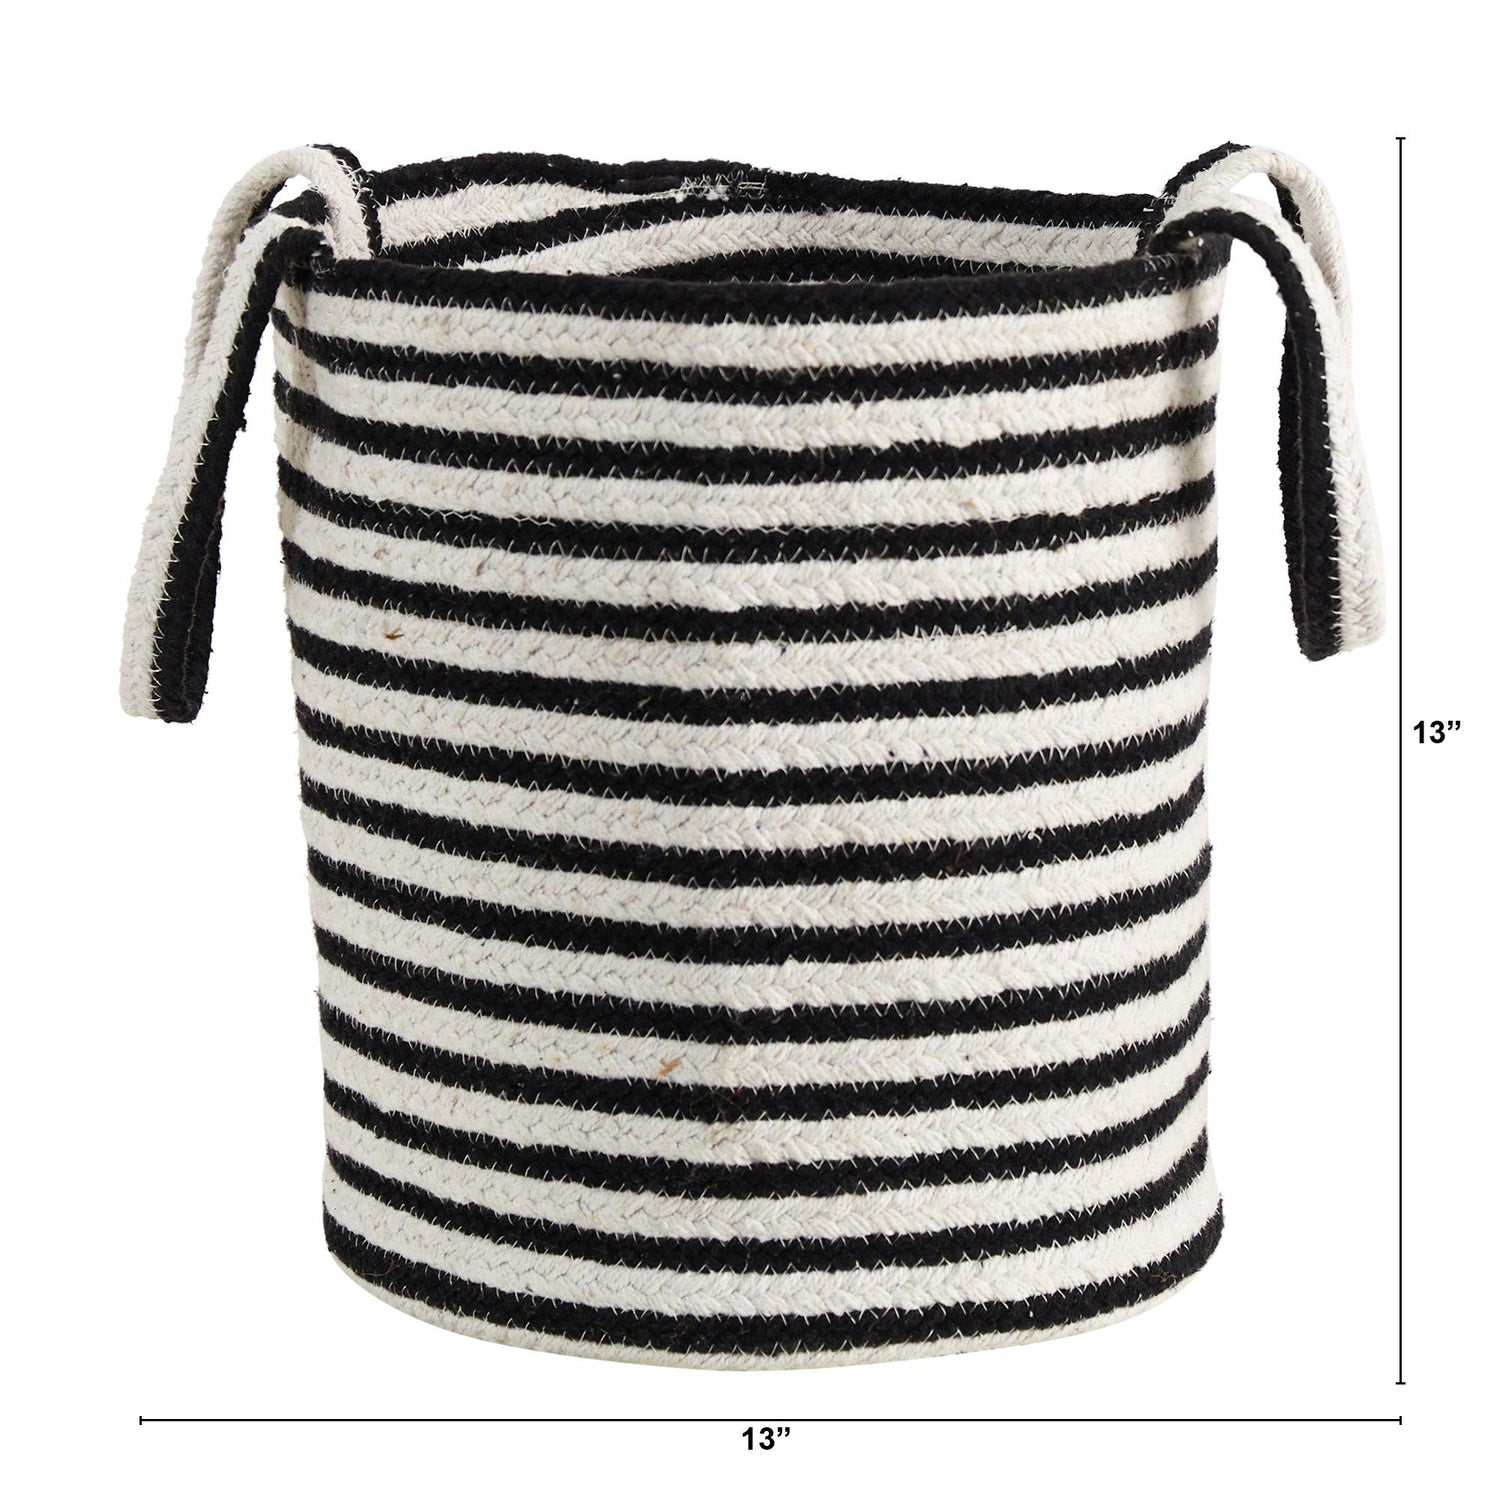 13” Boho Chic Basket Natural Cotton, Handwoven Black and White Stripe with Handles